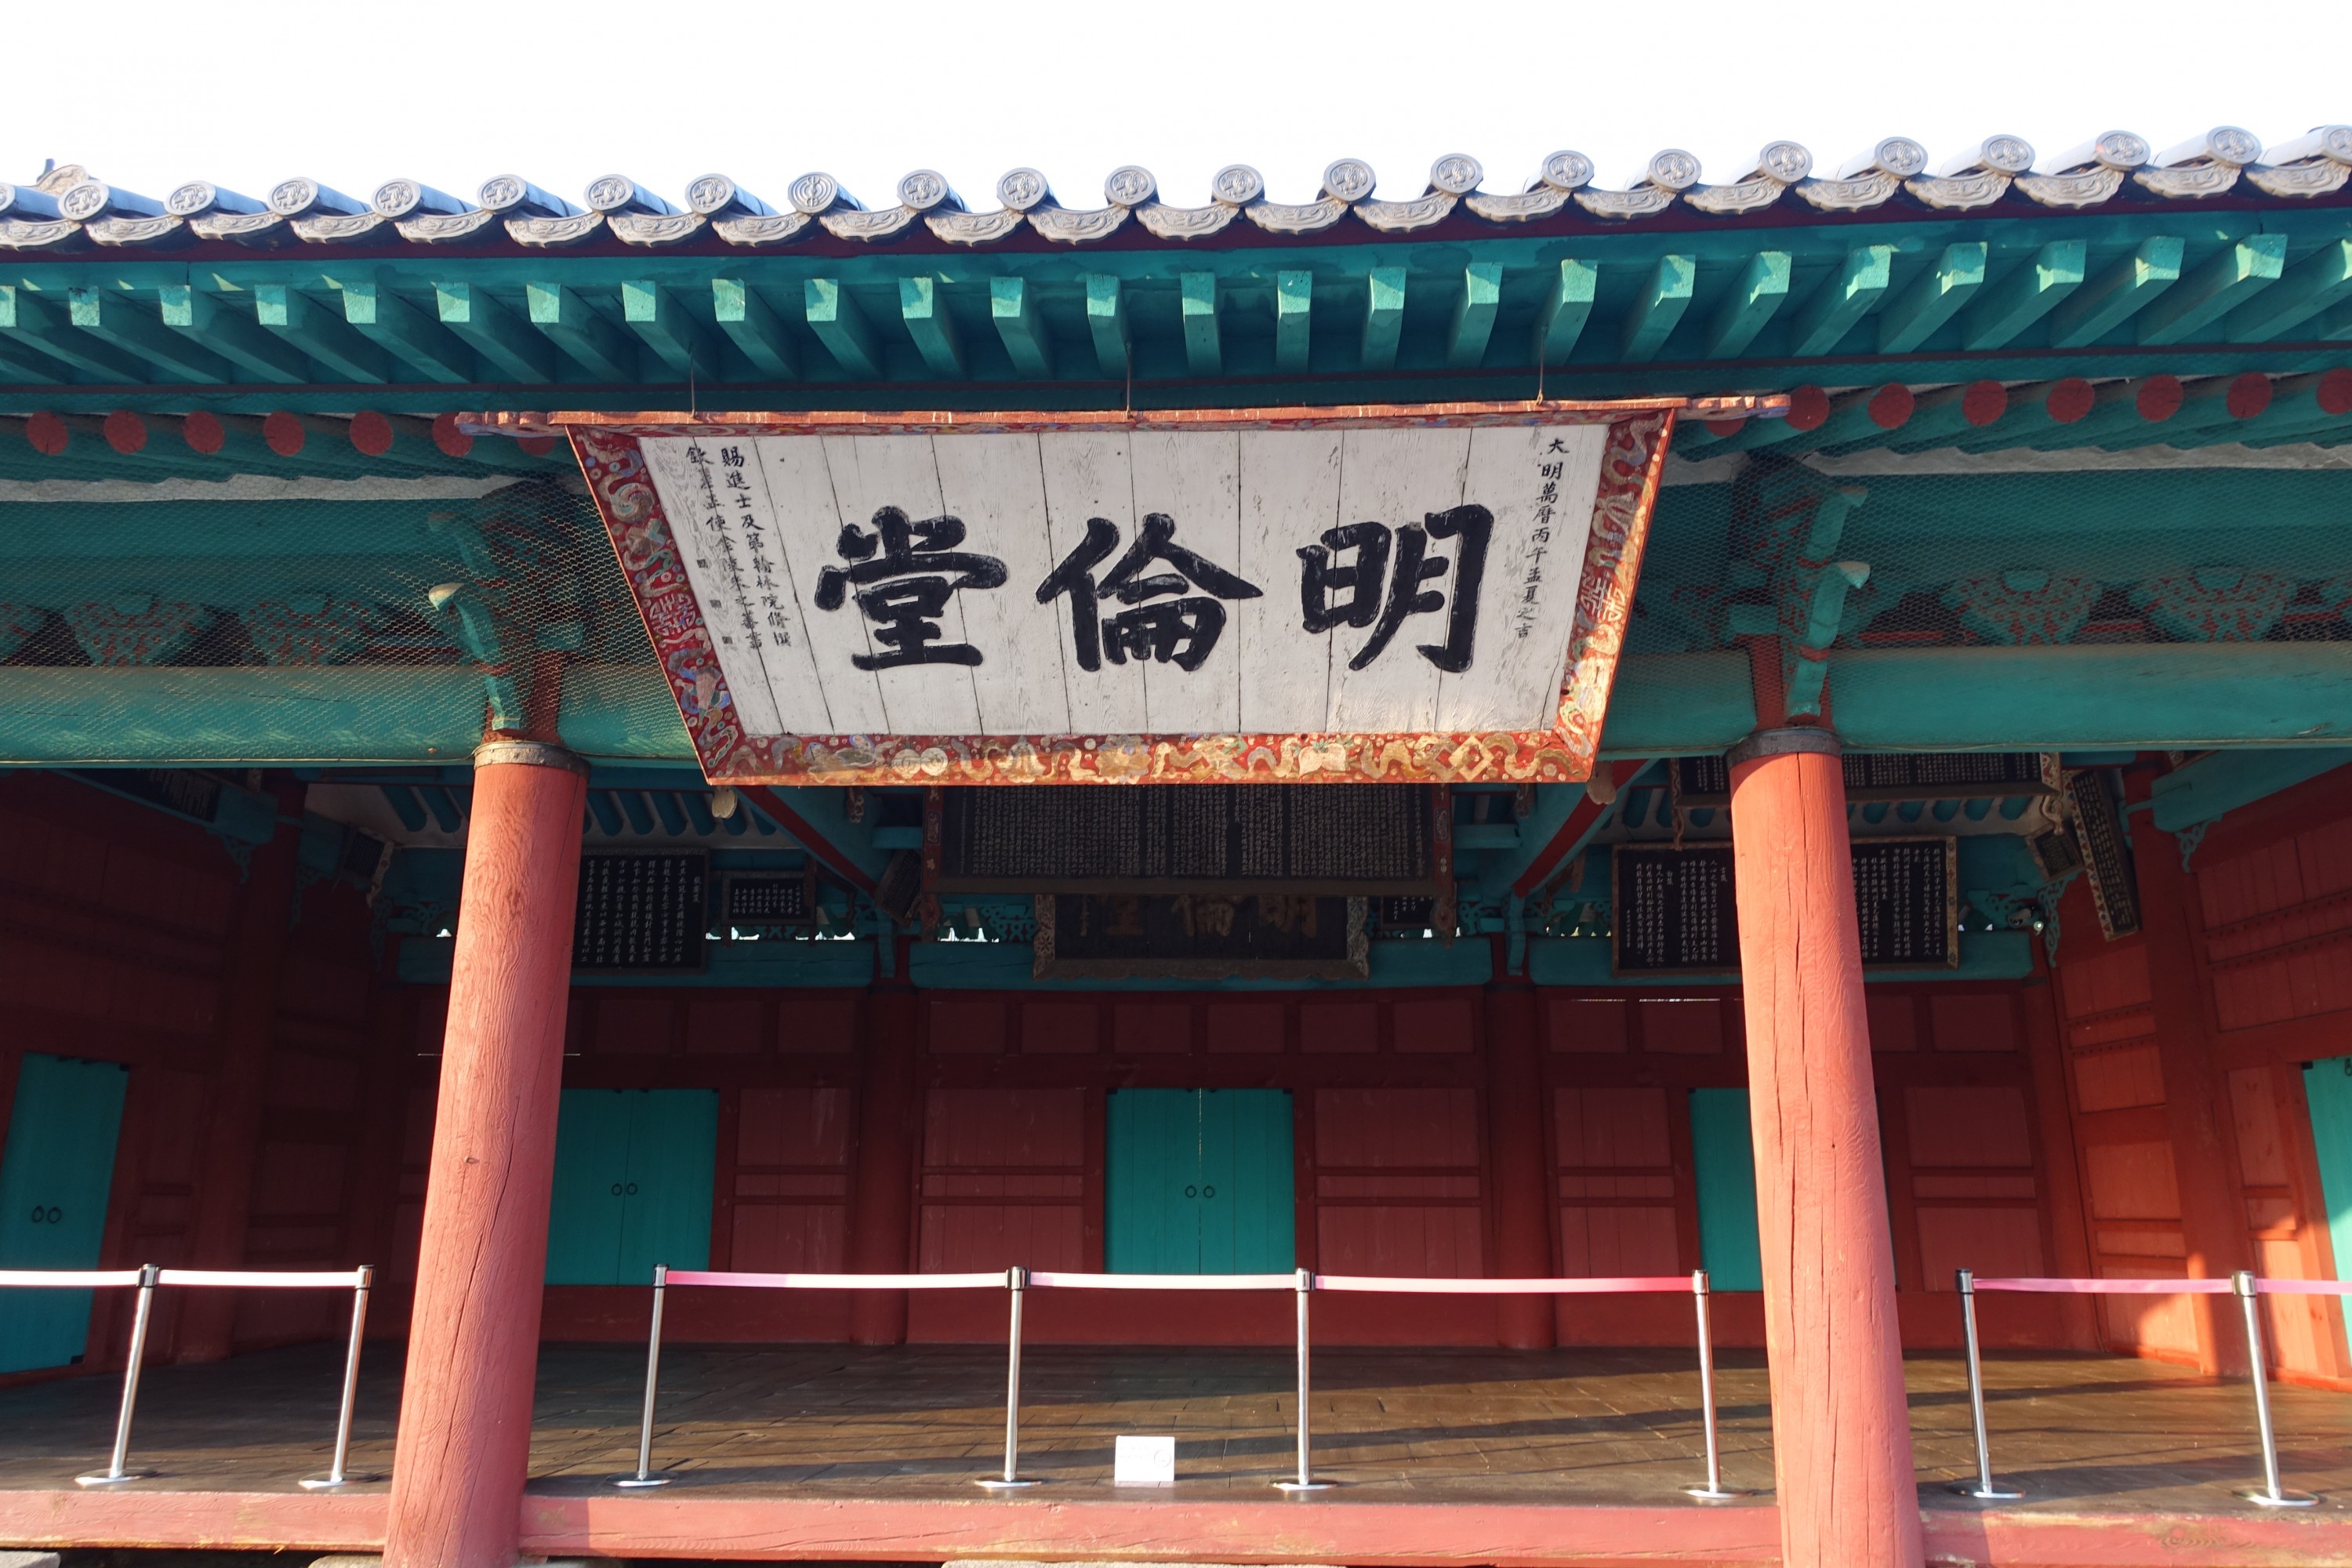 Sungkyunkwan University - Korea's oldest and foremost Confucian Academy